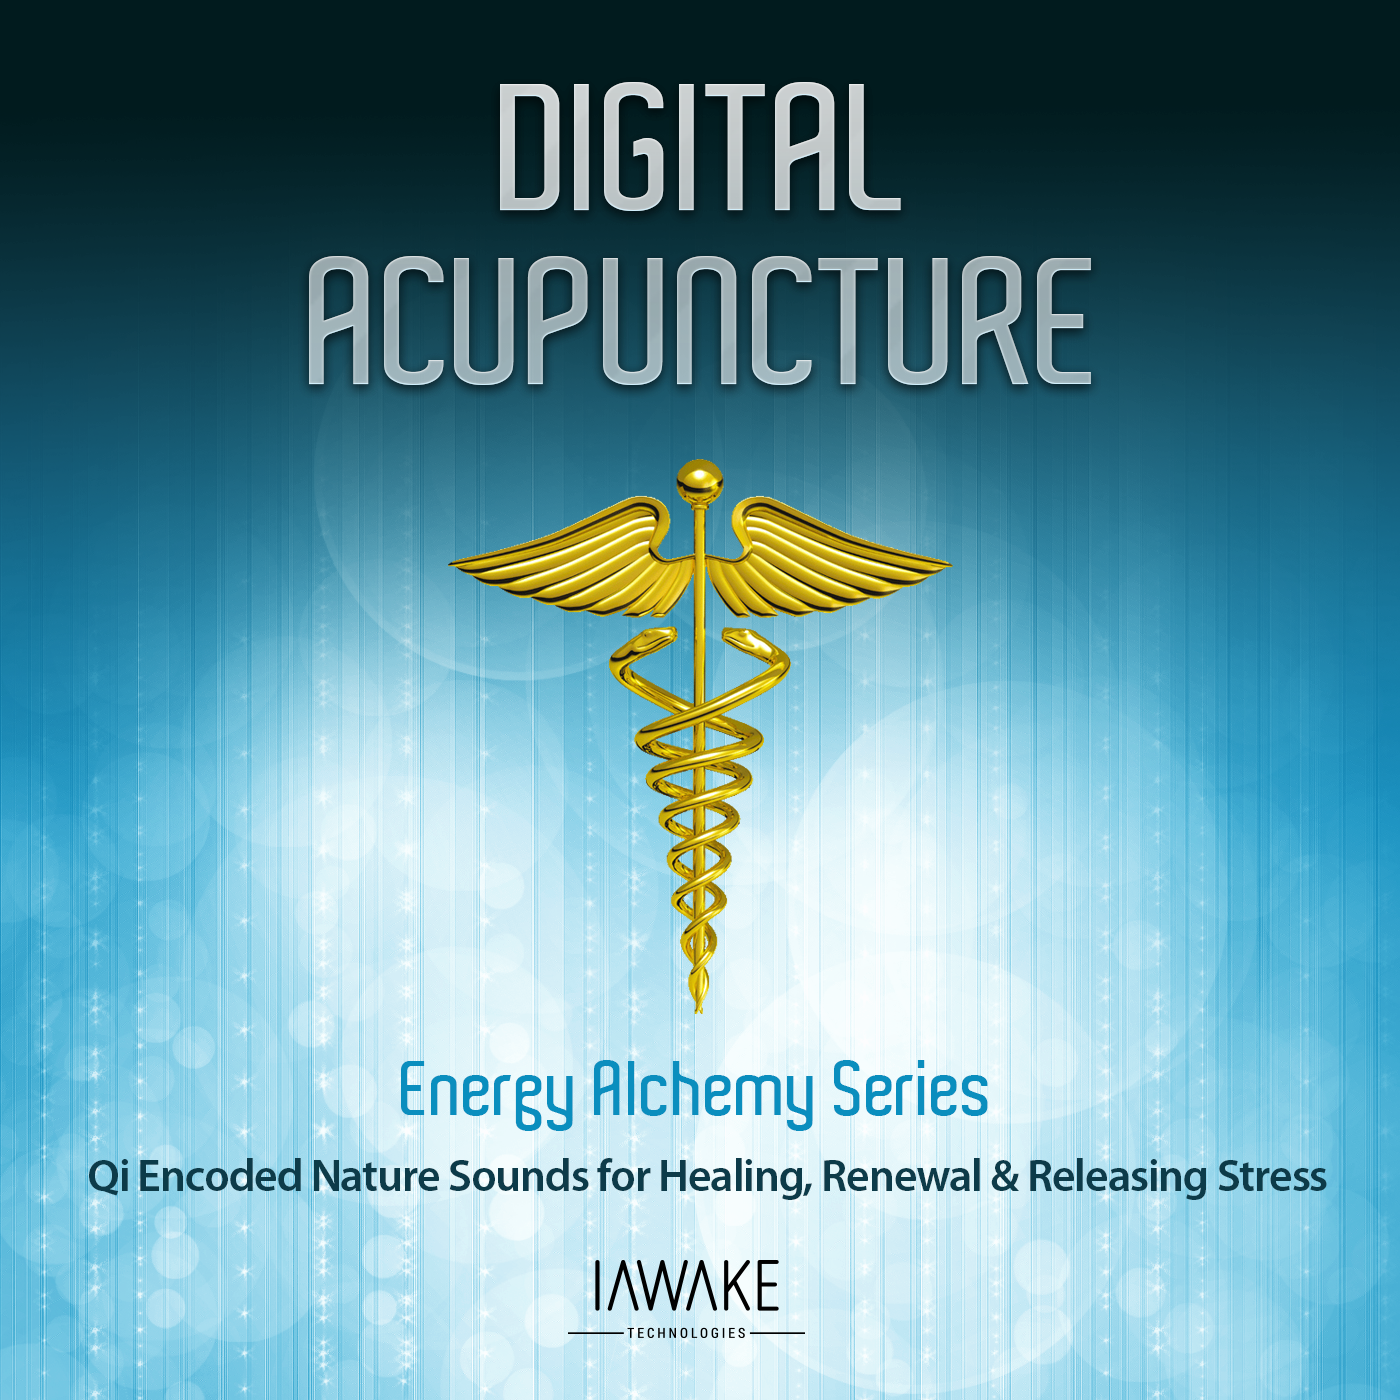 Audio Acupuncture (Qi-Encoded Nature Sounds for Healing, Renewal, and Releasing Stress) - iAwake Technologies